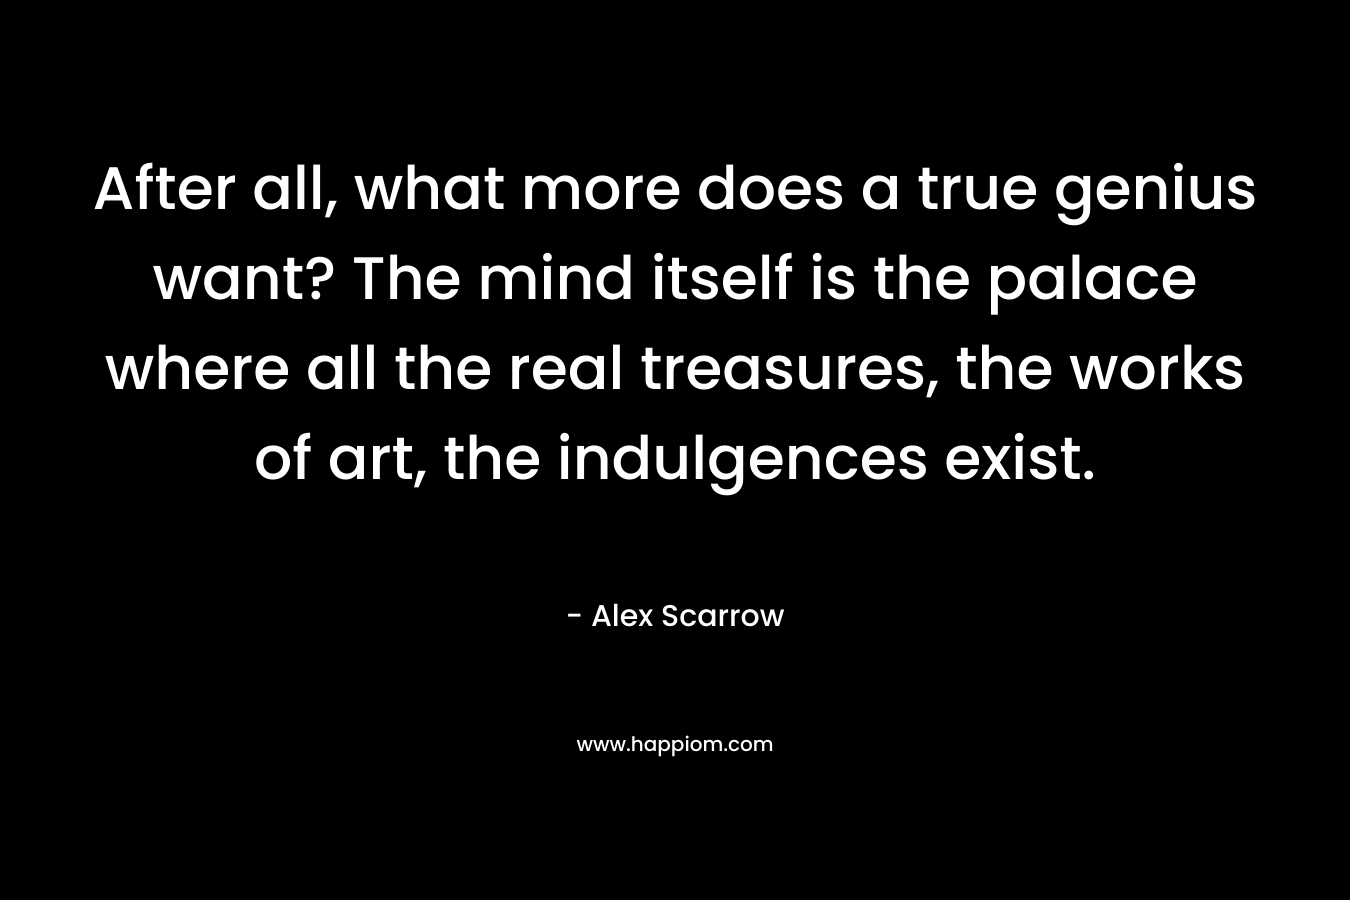 After all, what more does a true genius want? The mind itself is the palace where all the real treasures, the works of art, the indulgences exist. – Alex Scarrow